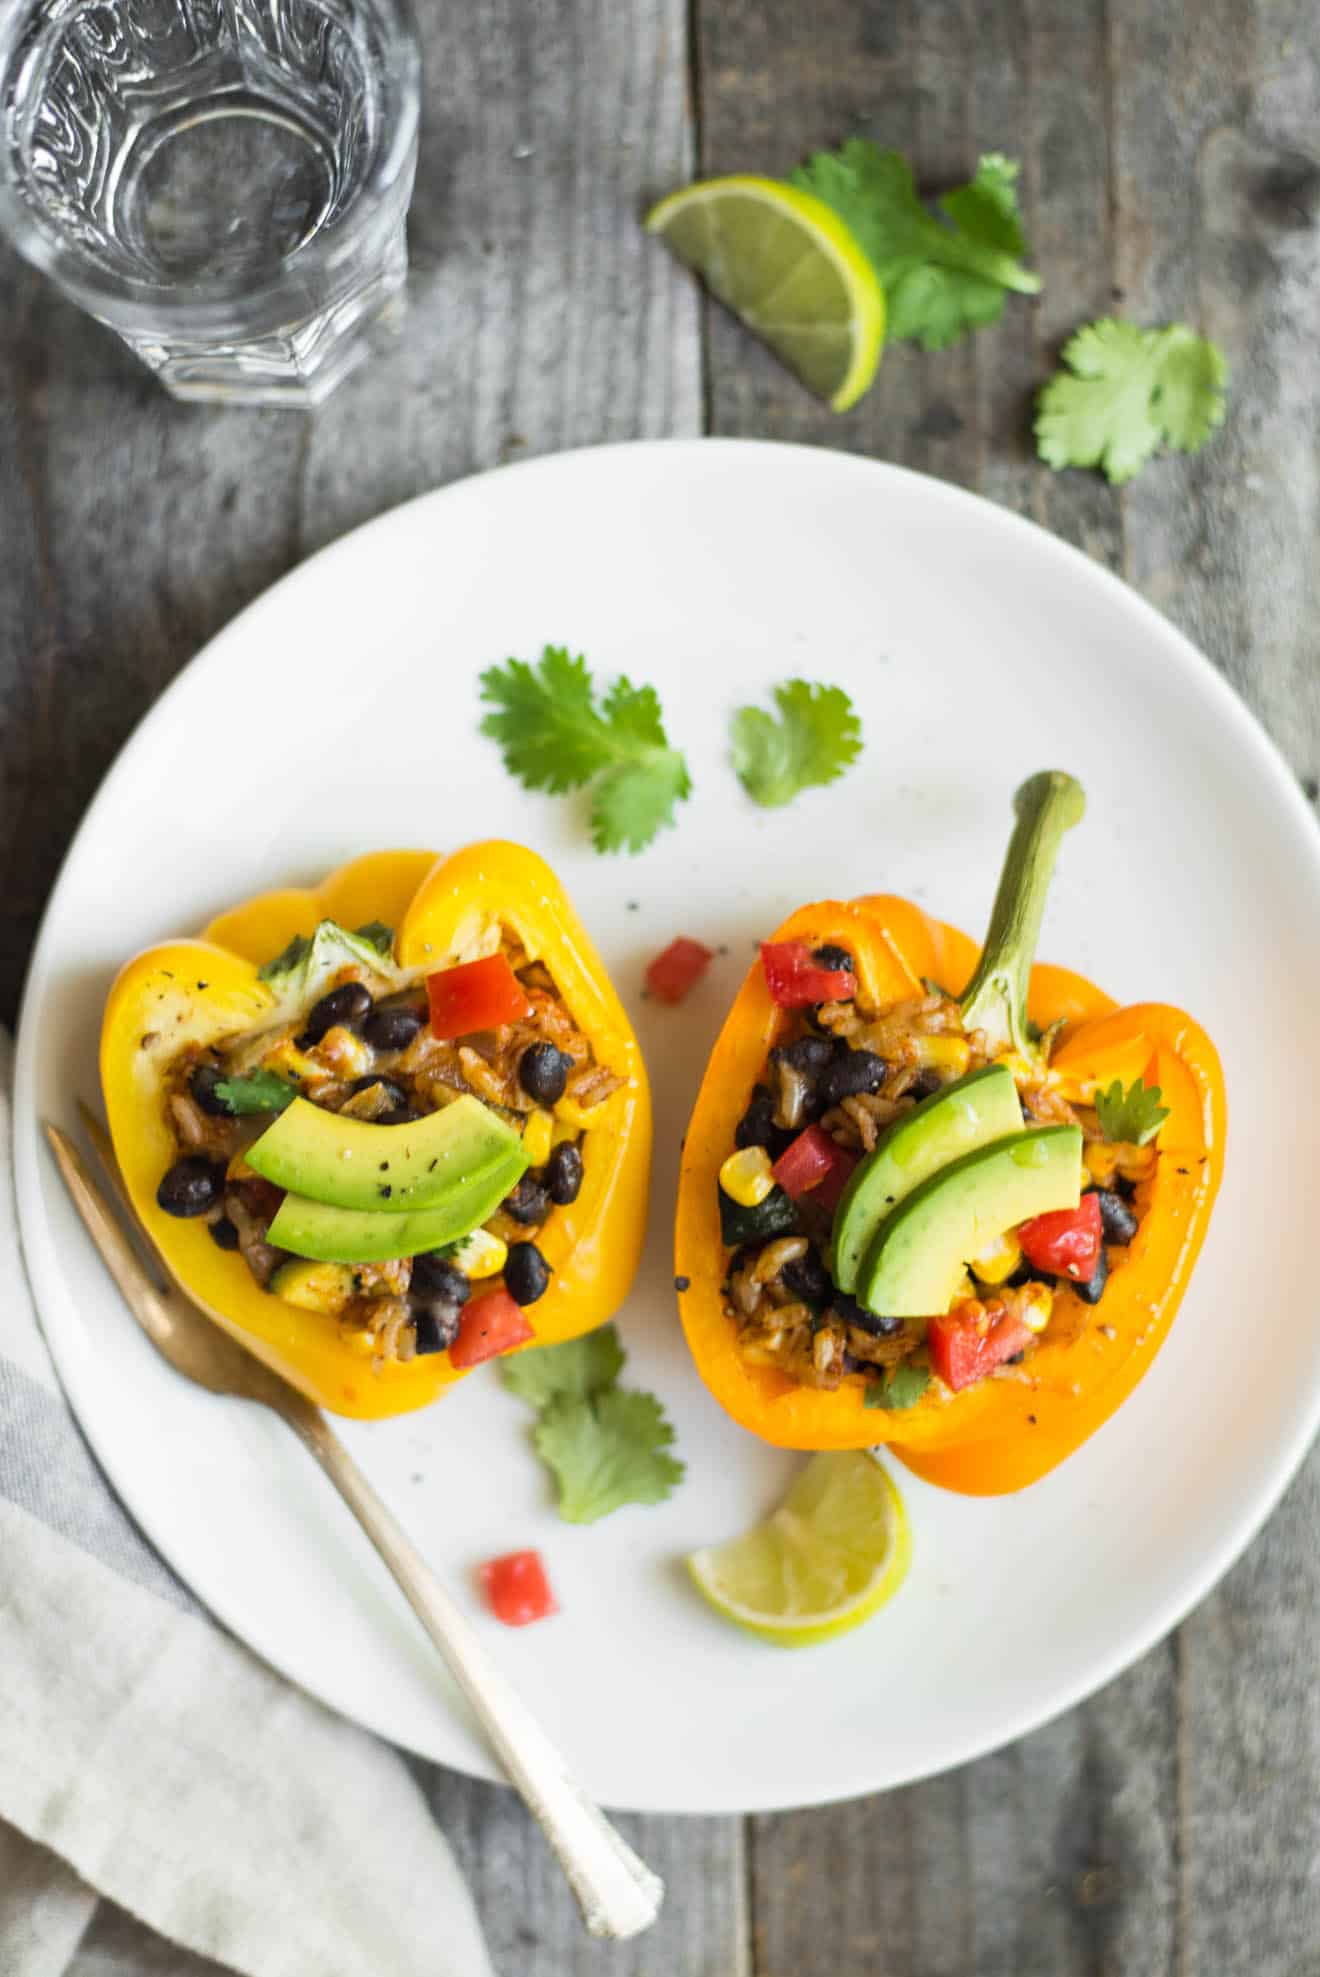 Mexican Rice Stuffed Peppers - a healthy, gluten-free dinner that is ready in 45 minutes. (409 calories per serving) by @healthynibs